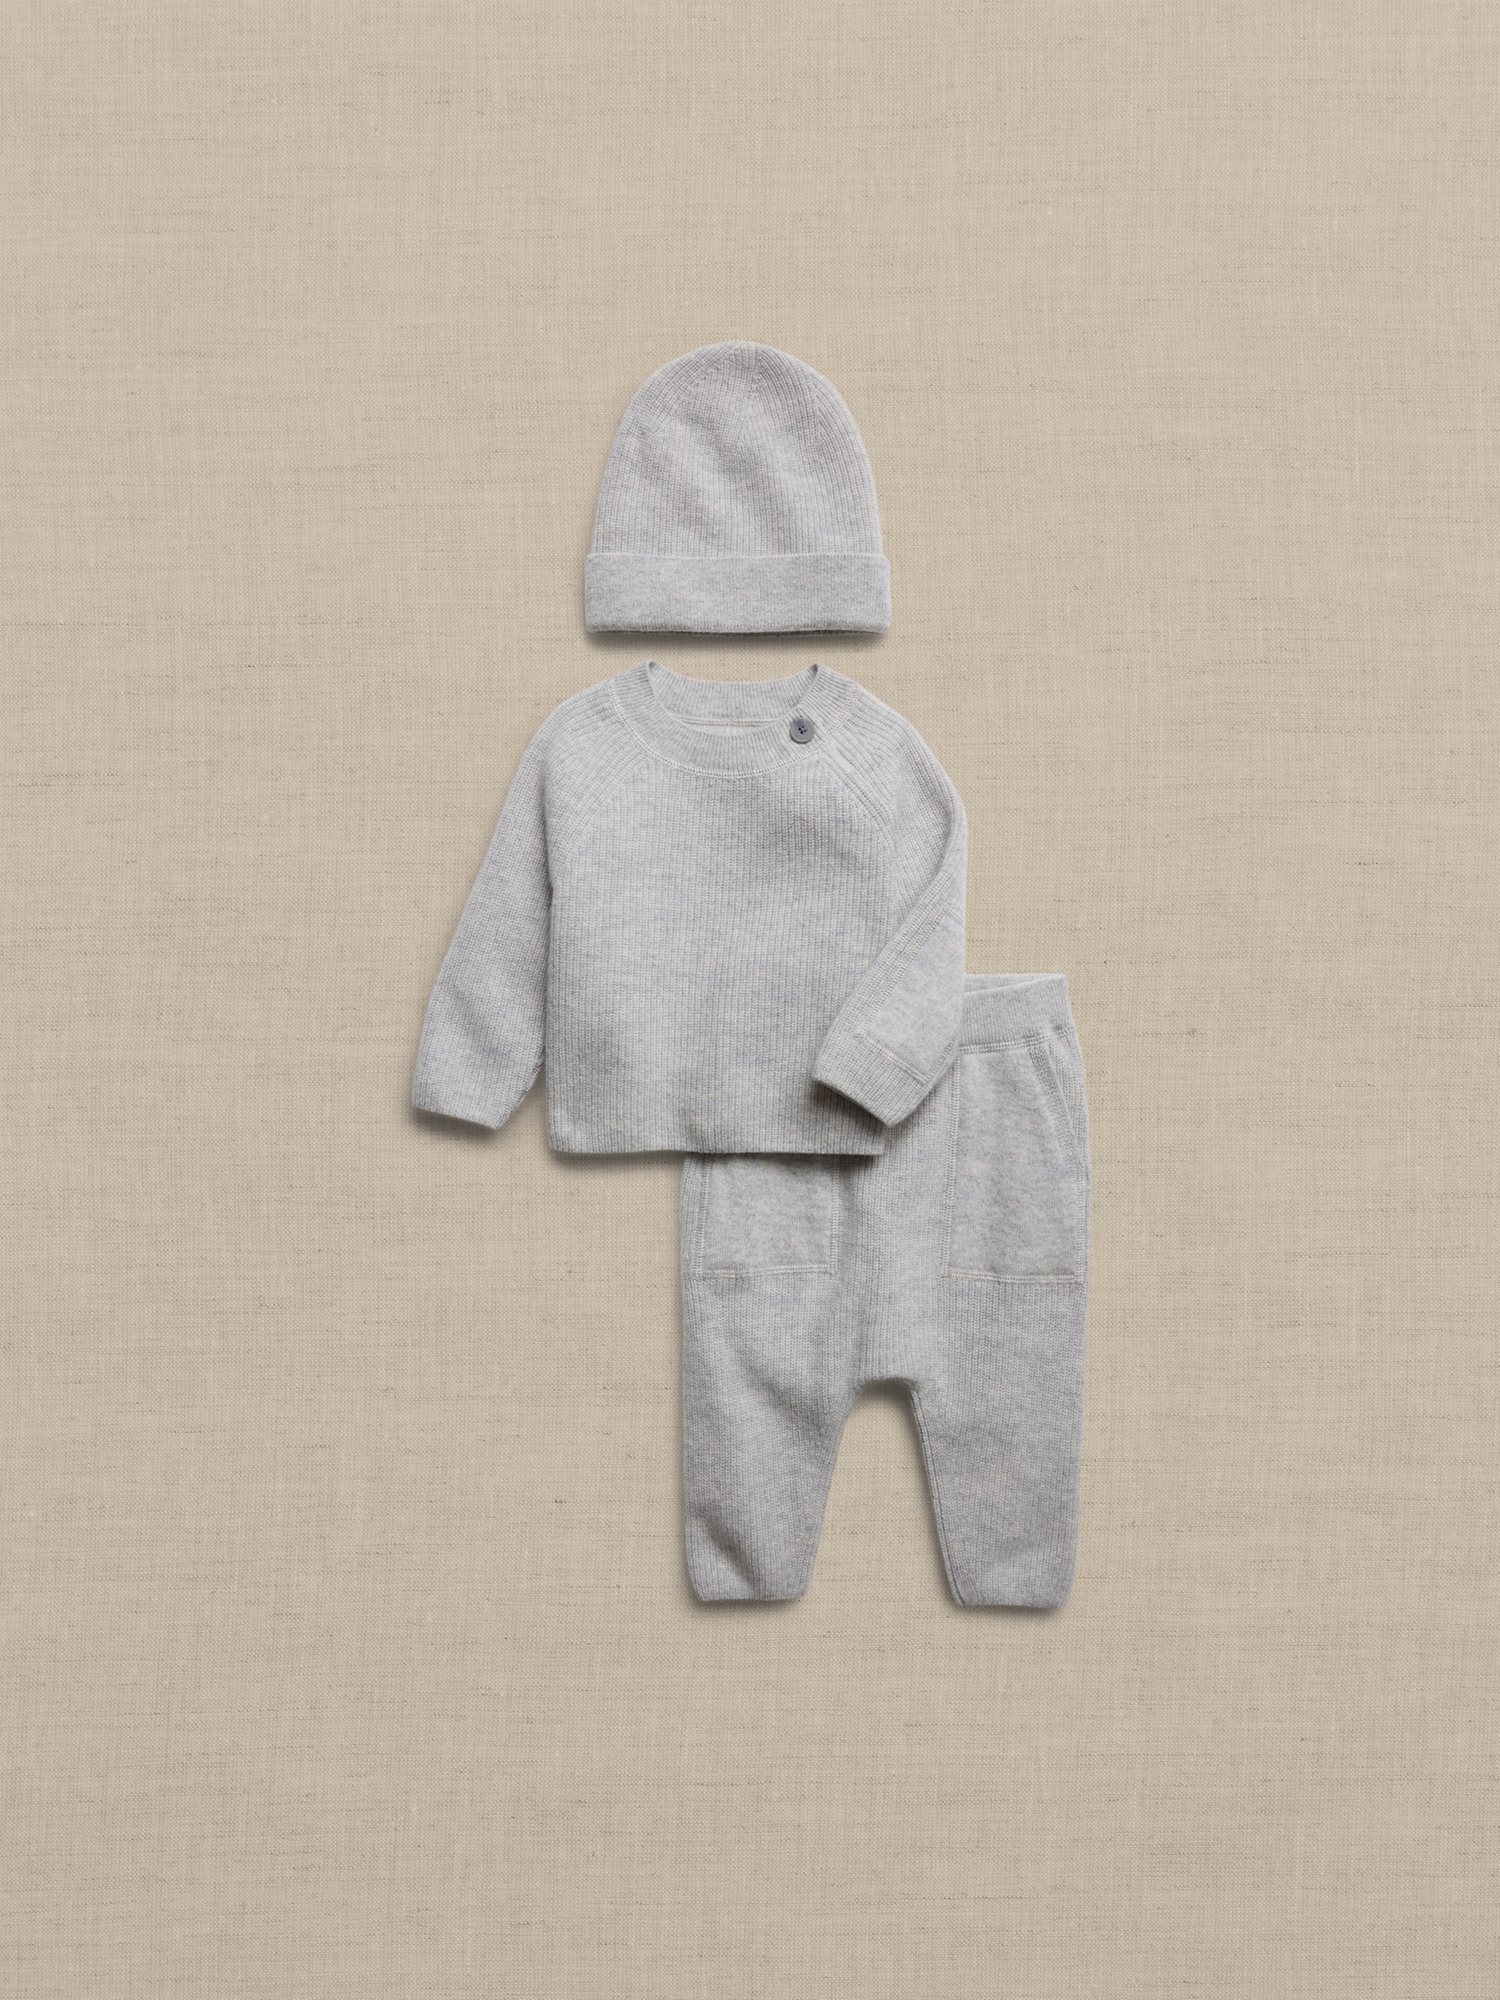 Curio Cashmere Gift Set for Baby